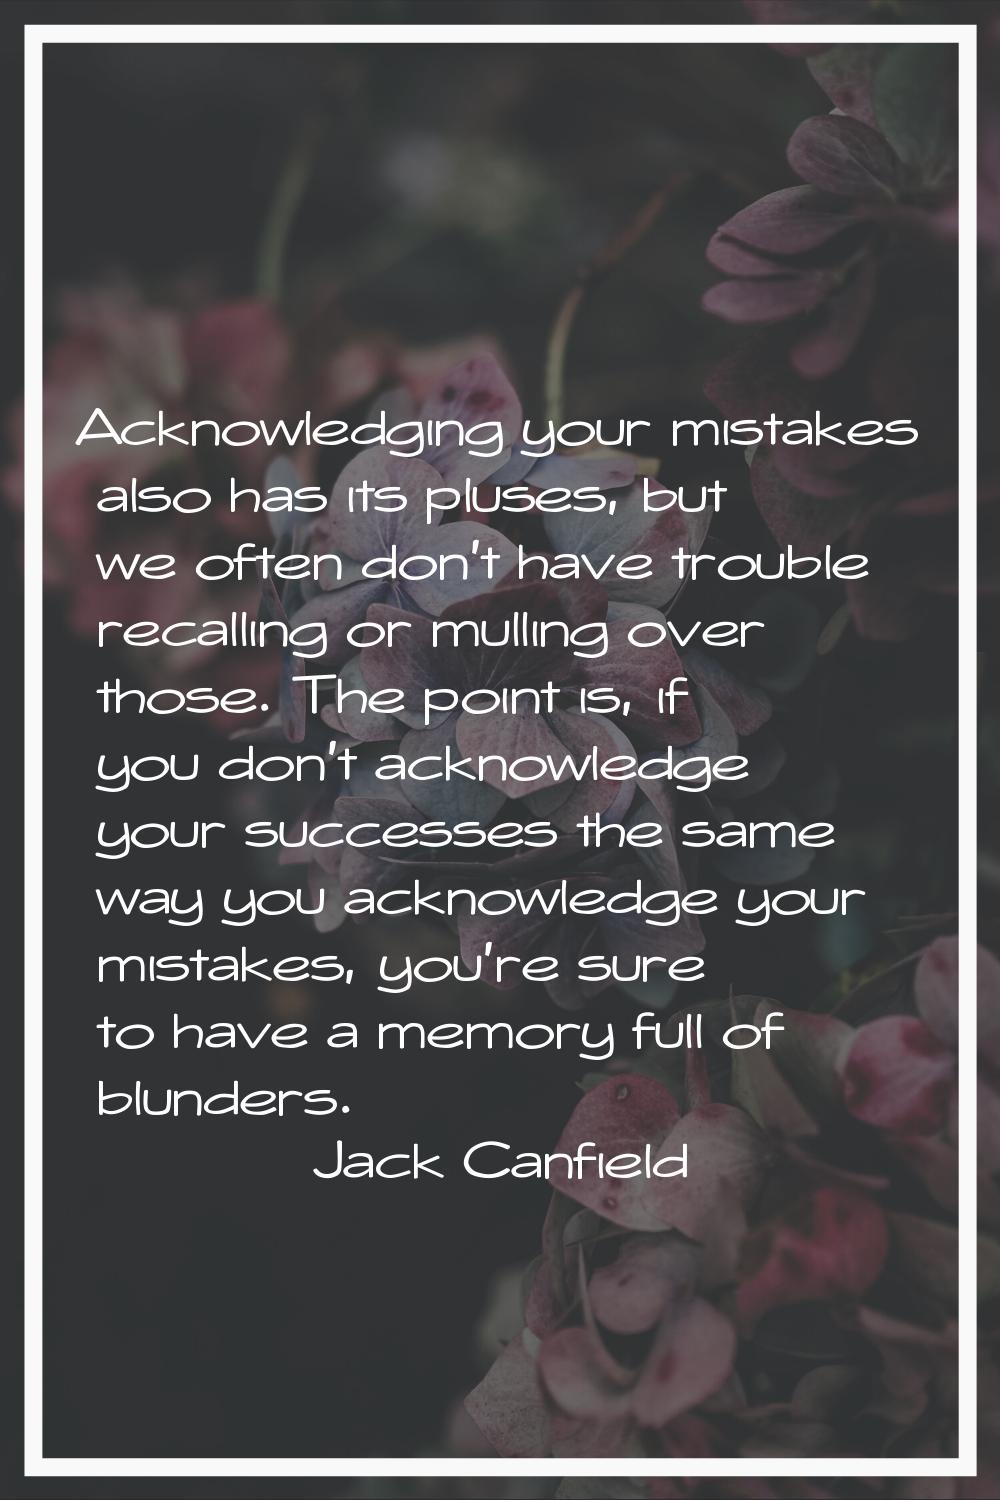 Acknowledging your mistakes also has its pluses, but we often don't have trouble recalling or mulli